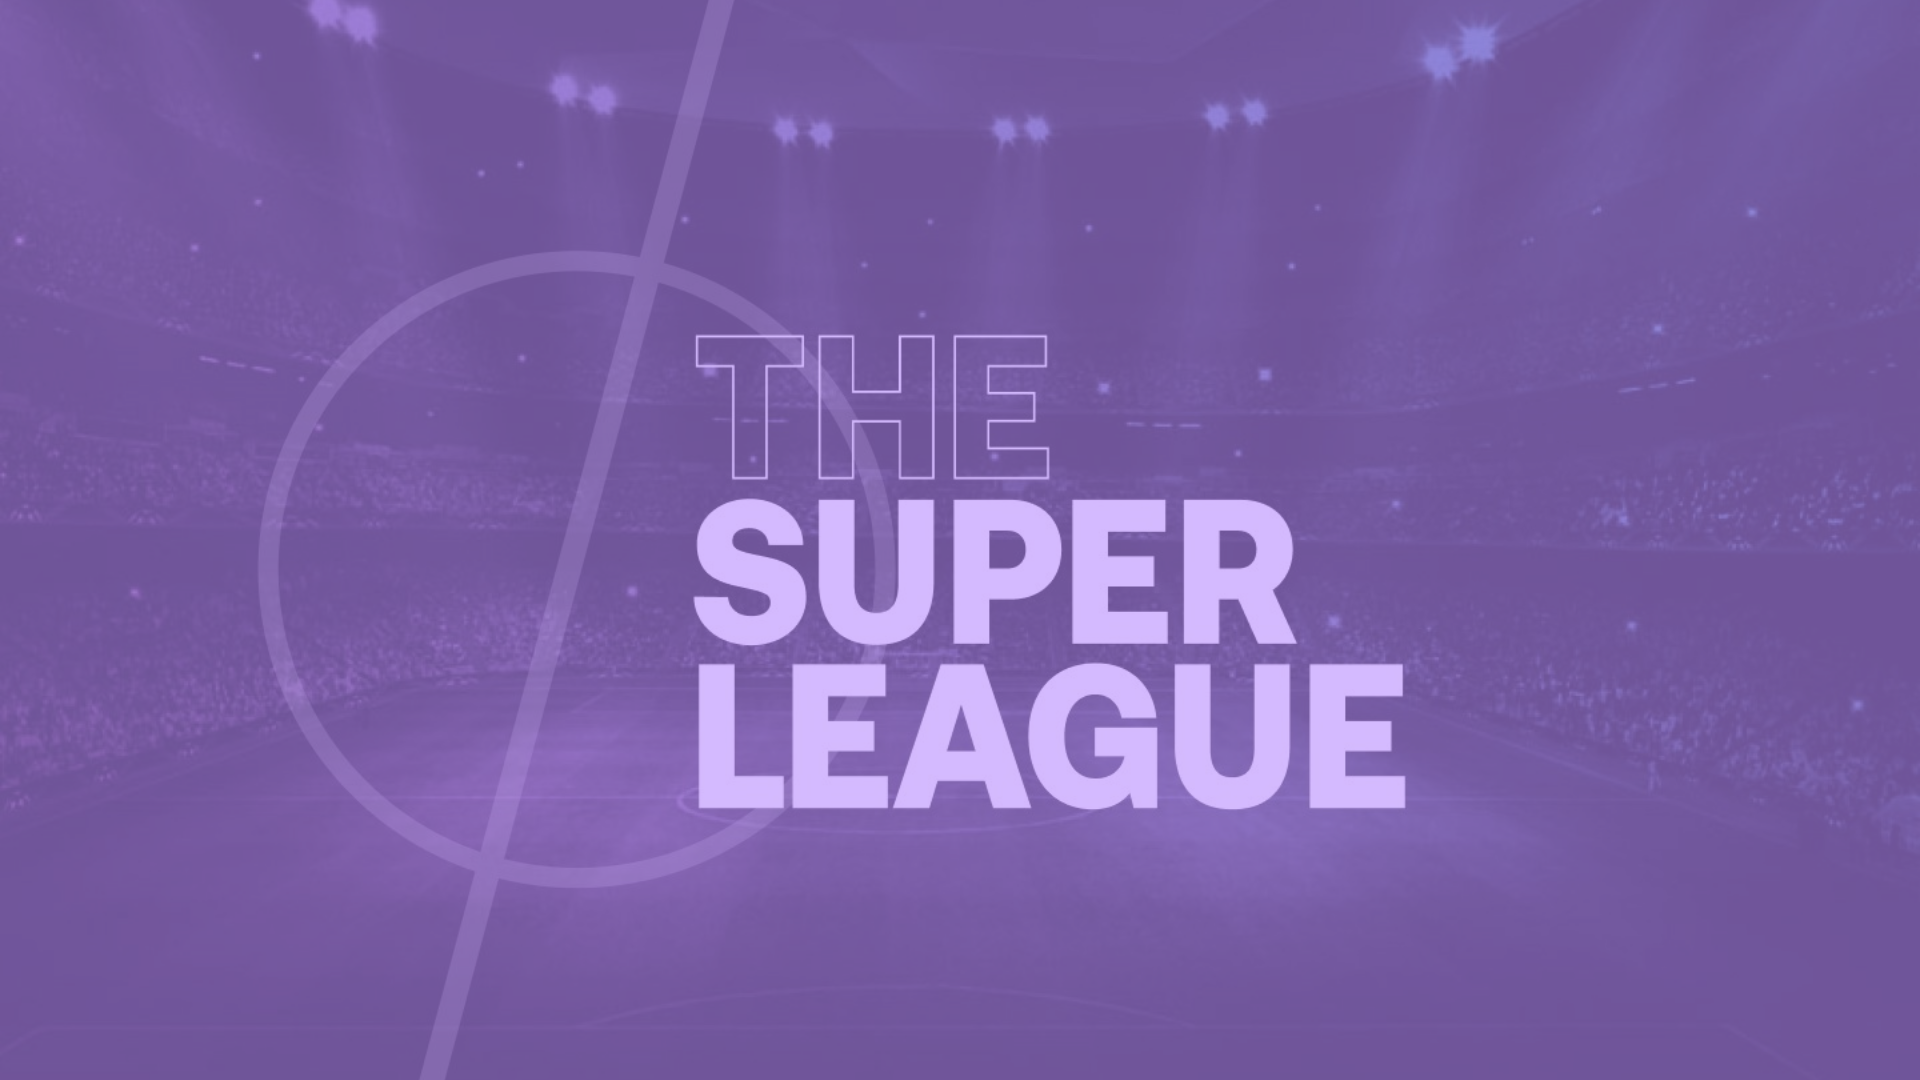 What will the Super League shirts look like?